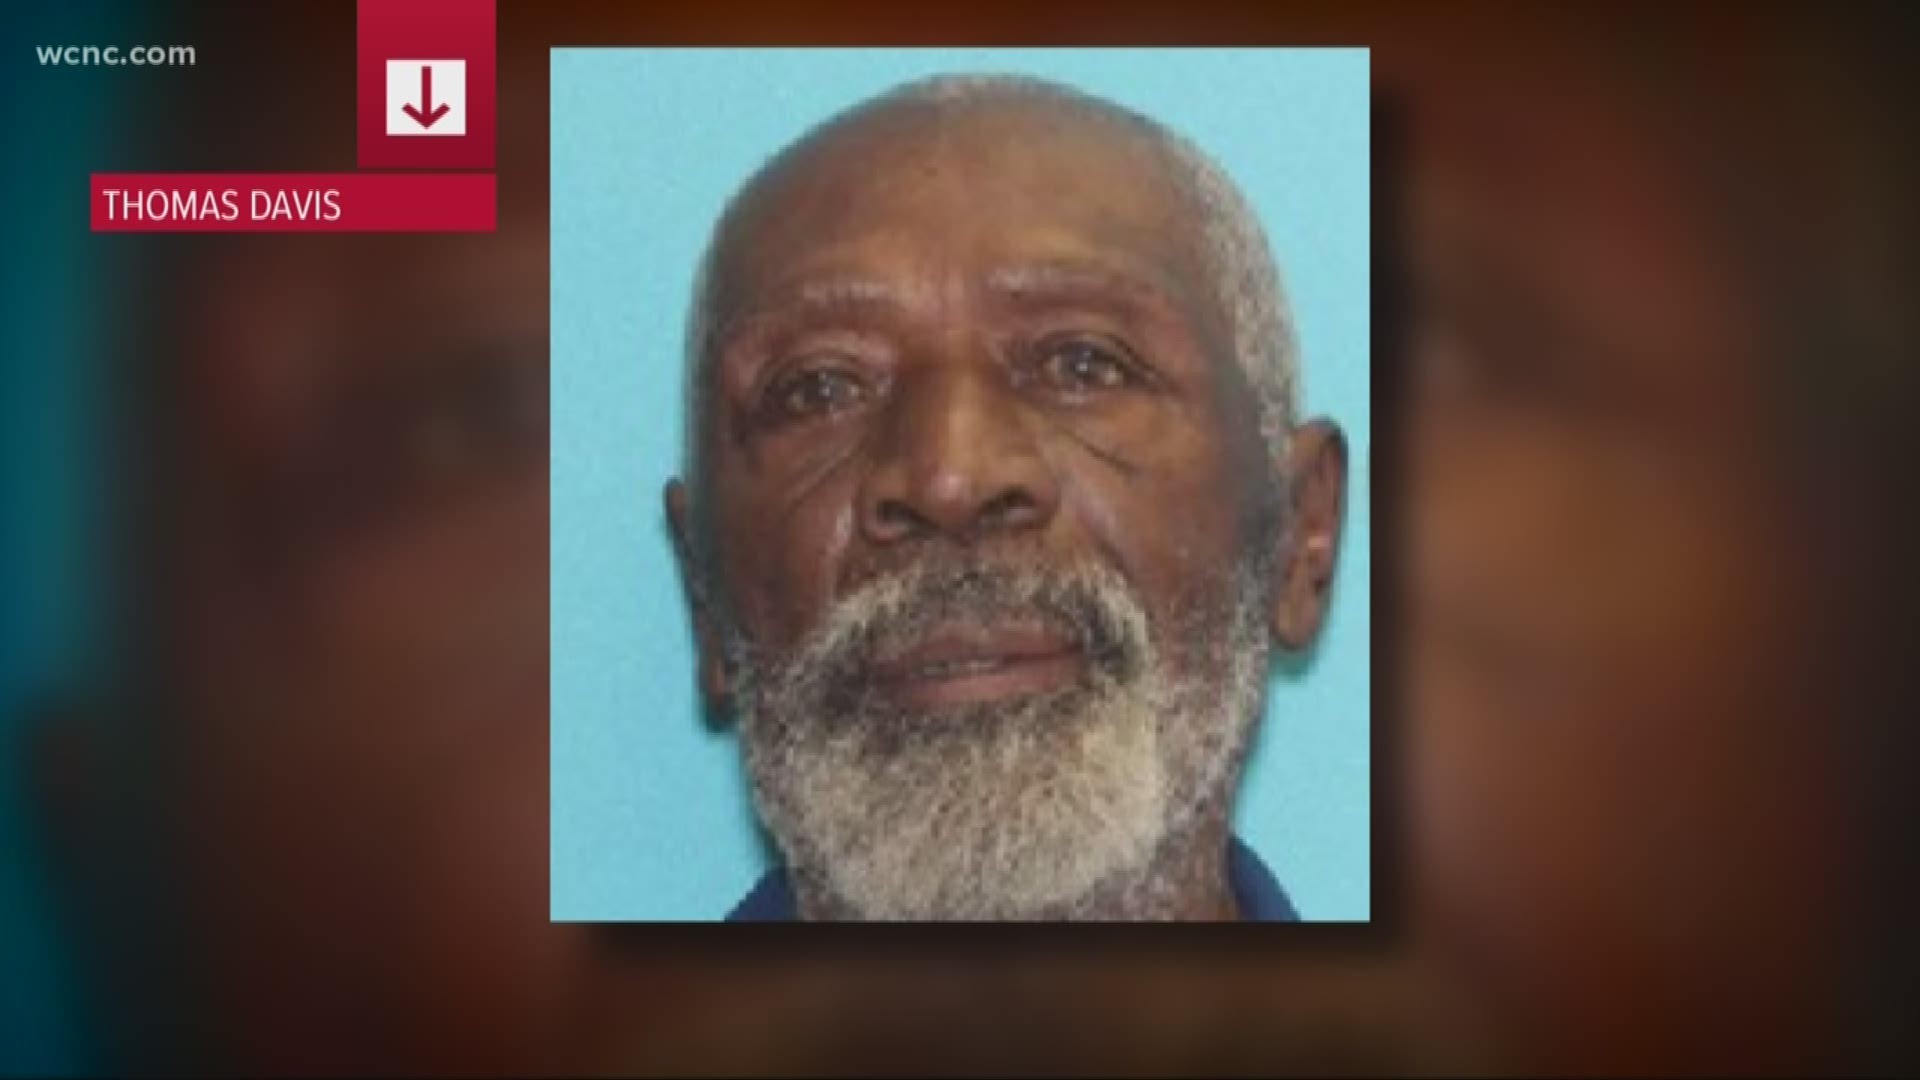 Police are searching for an 89-year-old man who has been missing since Wednesday night.